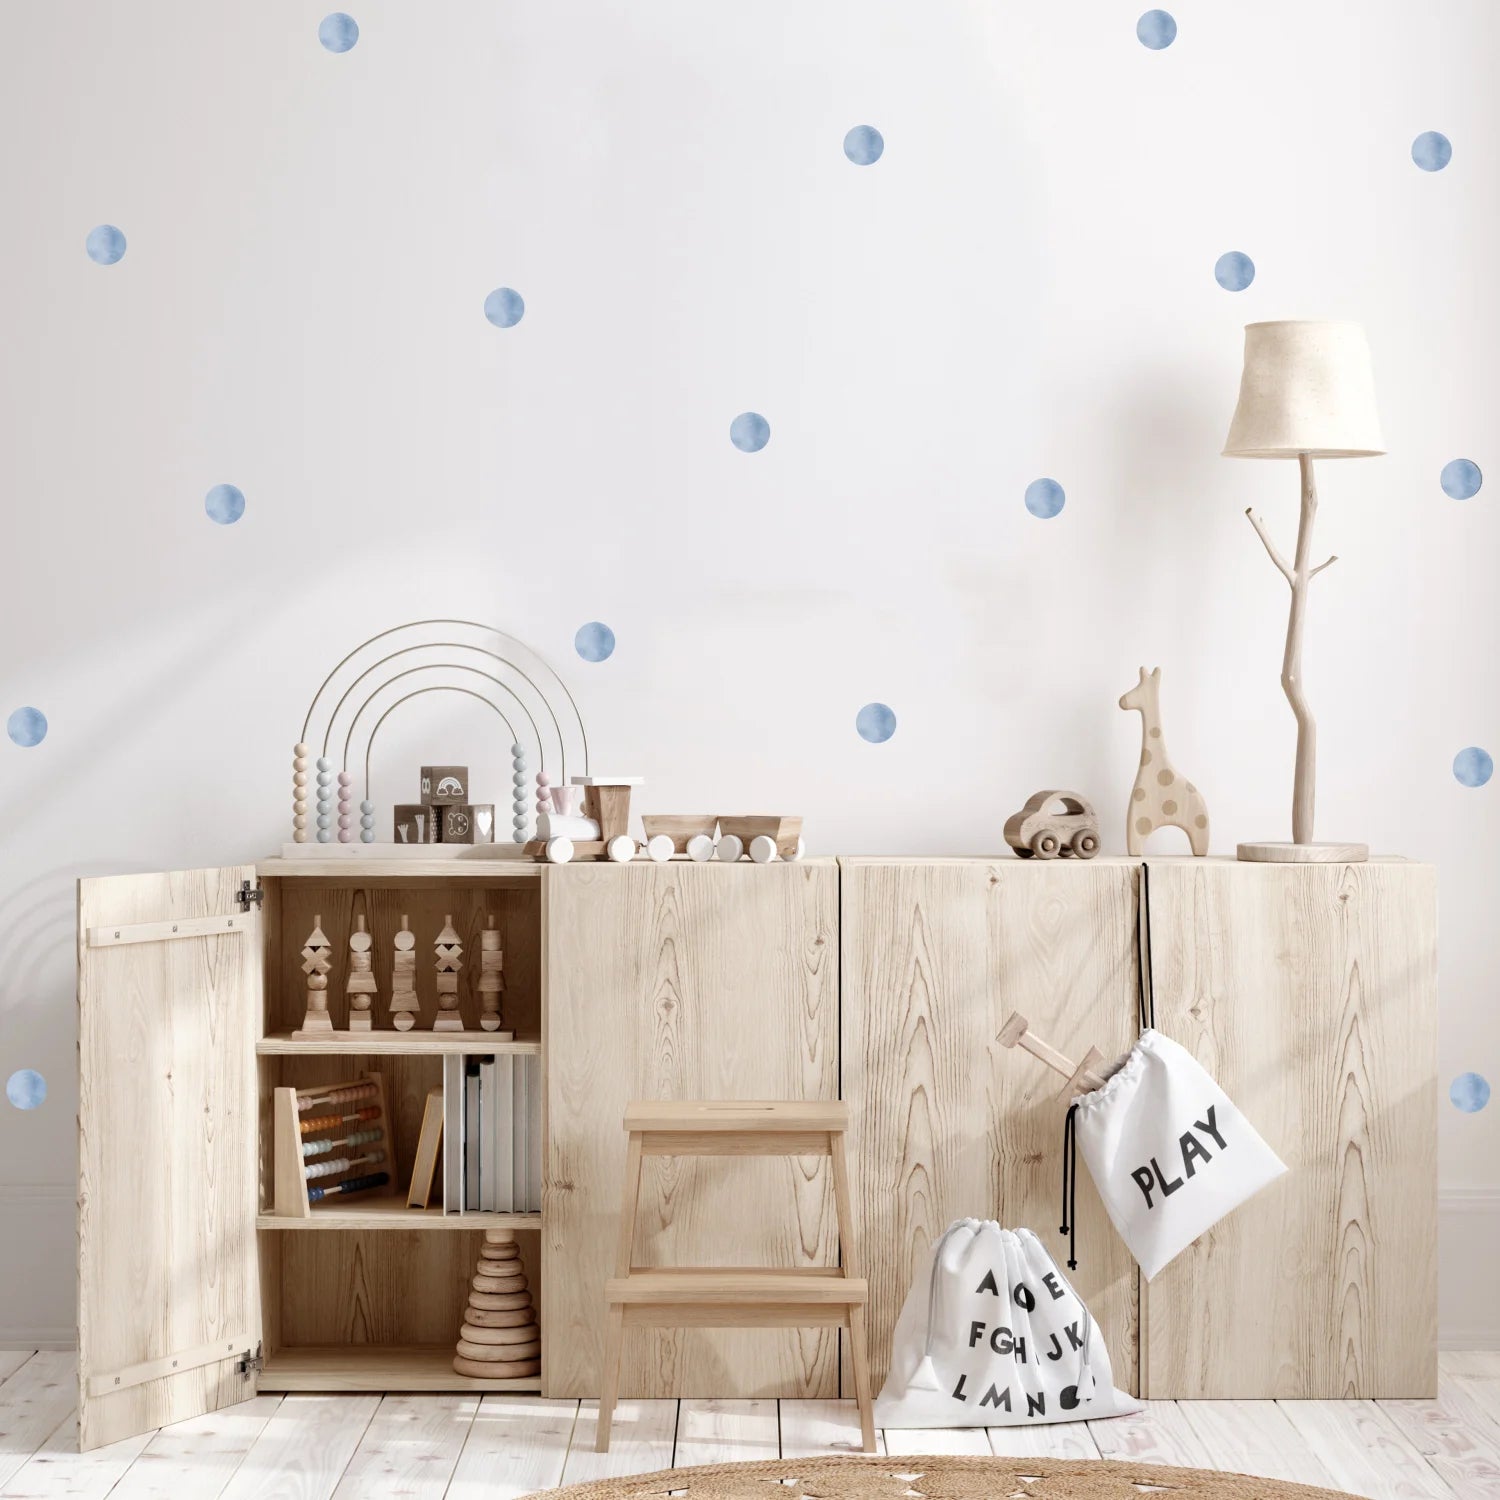 Dusty Blue Polka Dot Wall Decal - Decals Dots